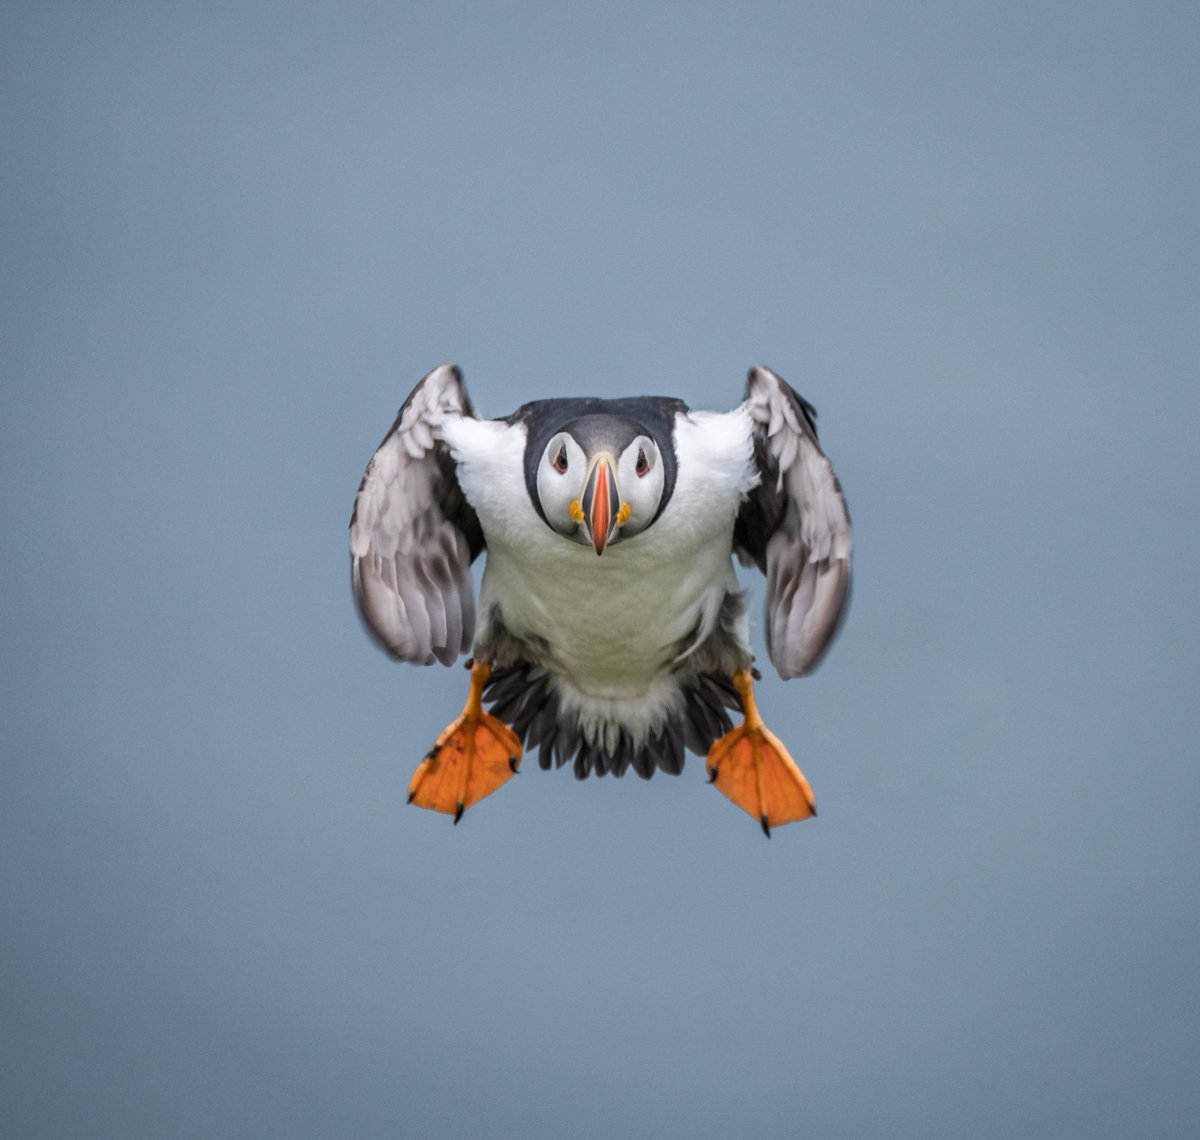 And the public vote winner for the 2018 #CapturingTheMoment  is… ‘Incoming puffin’! George has won a five-day photography tour for two to Glencoe, Scotland in January 2019. A special thanks to @lightandlandphotography for donating this great prize and congratulations to George!